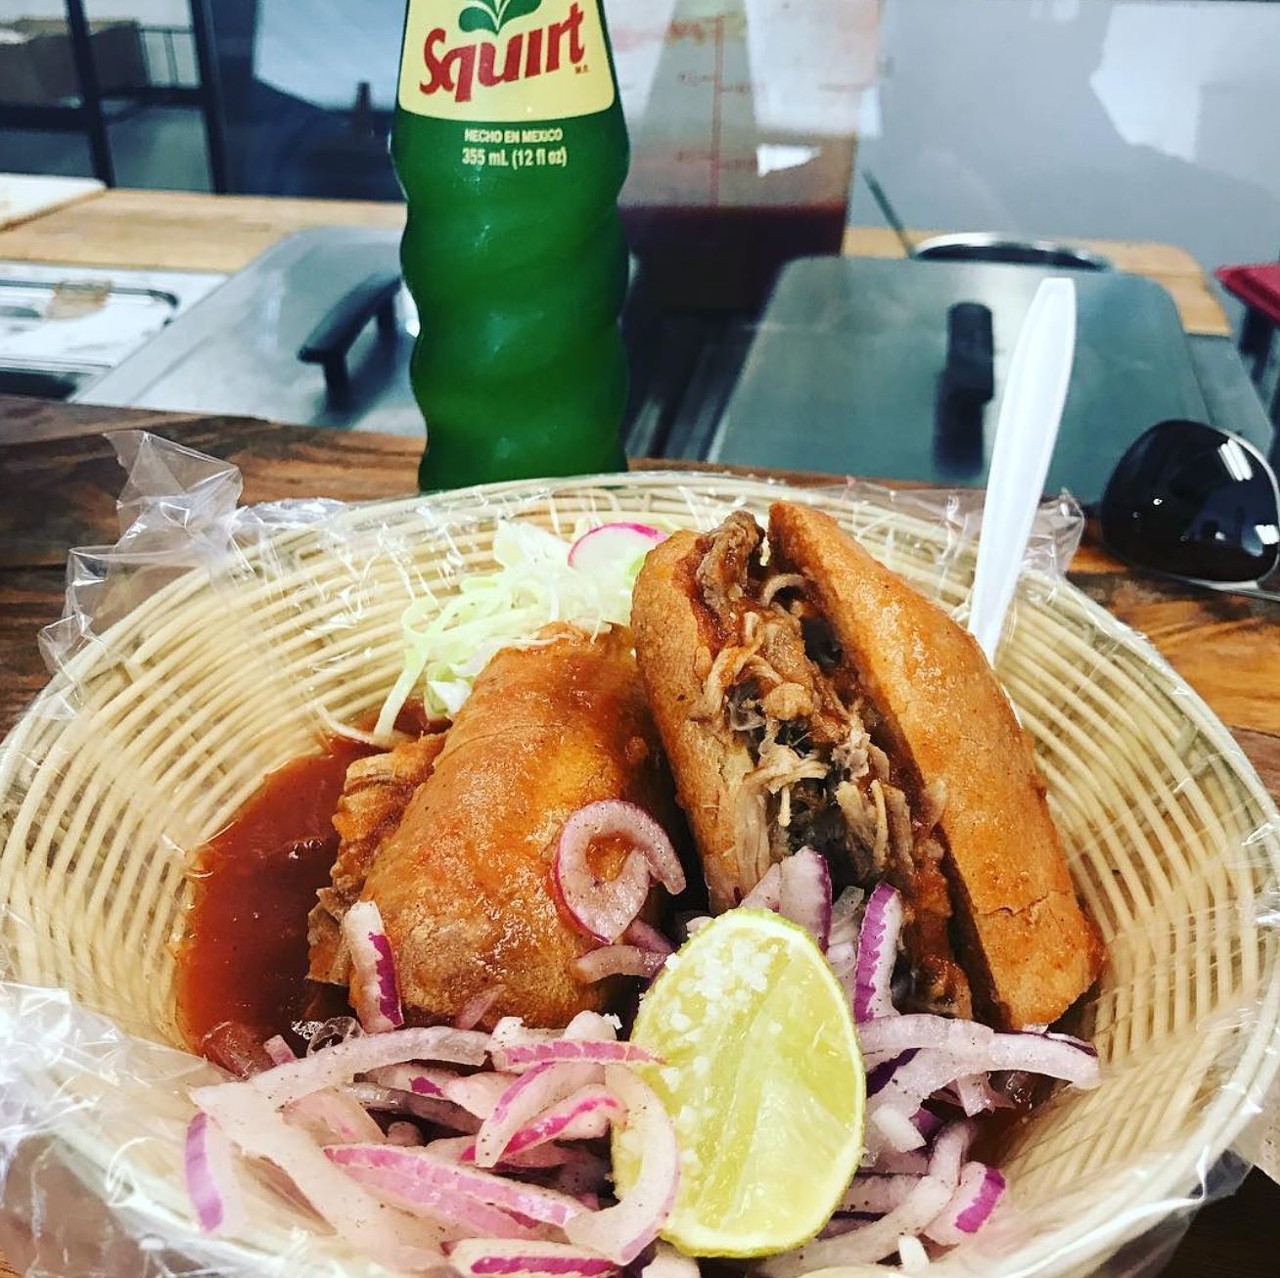 Ro-ho Pork and Bread
8617 N New Braunfels Ave, (210) 800-3487, ro-hoporkandbread.com
Pork and bread might sound limited, but the flavor will more than make up for that.
Photo via Instagram / enriquevega3